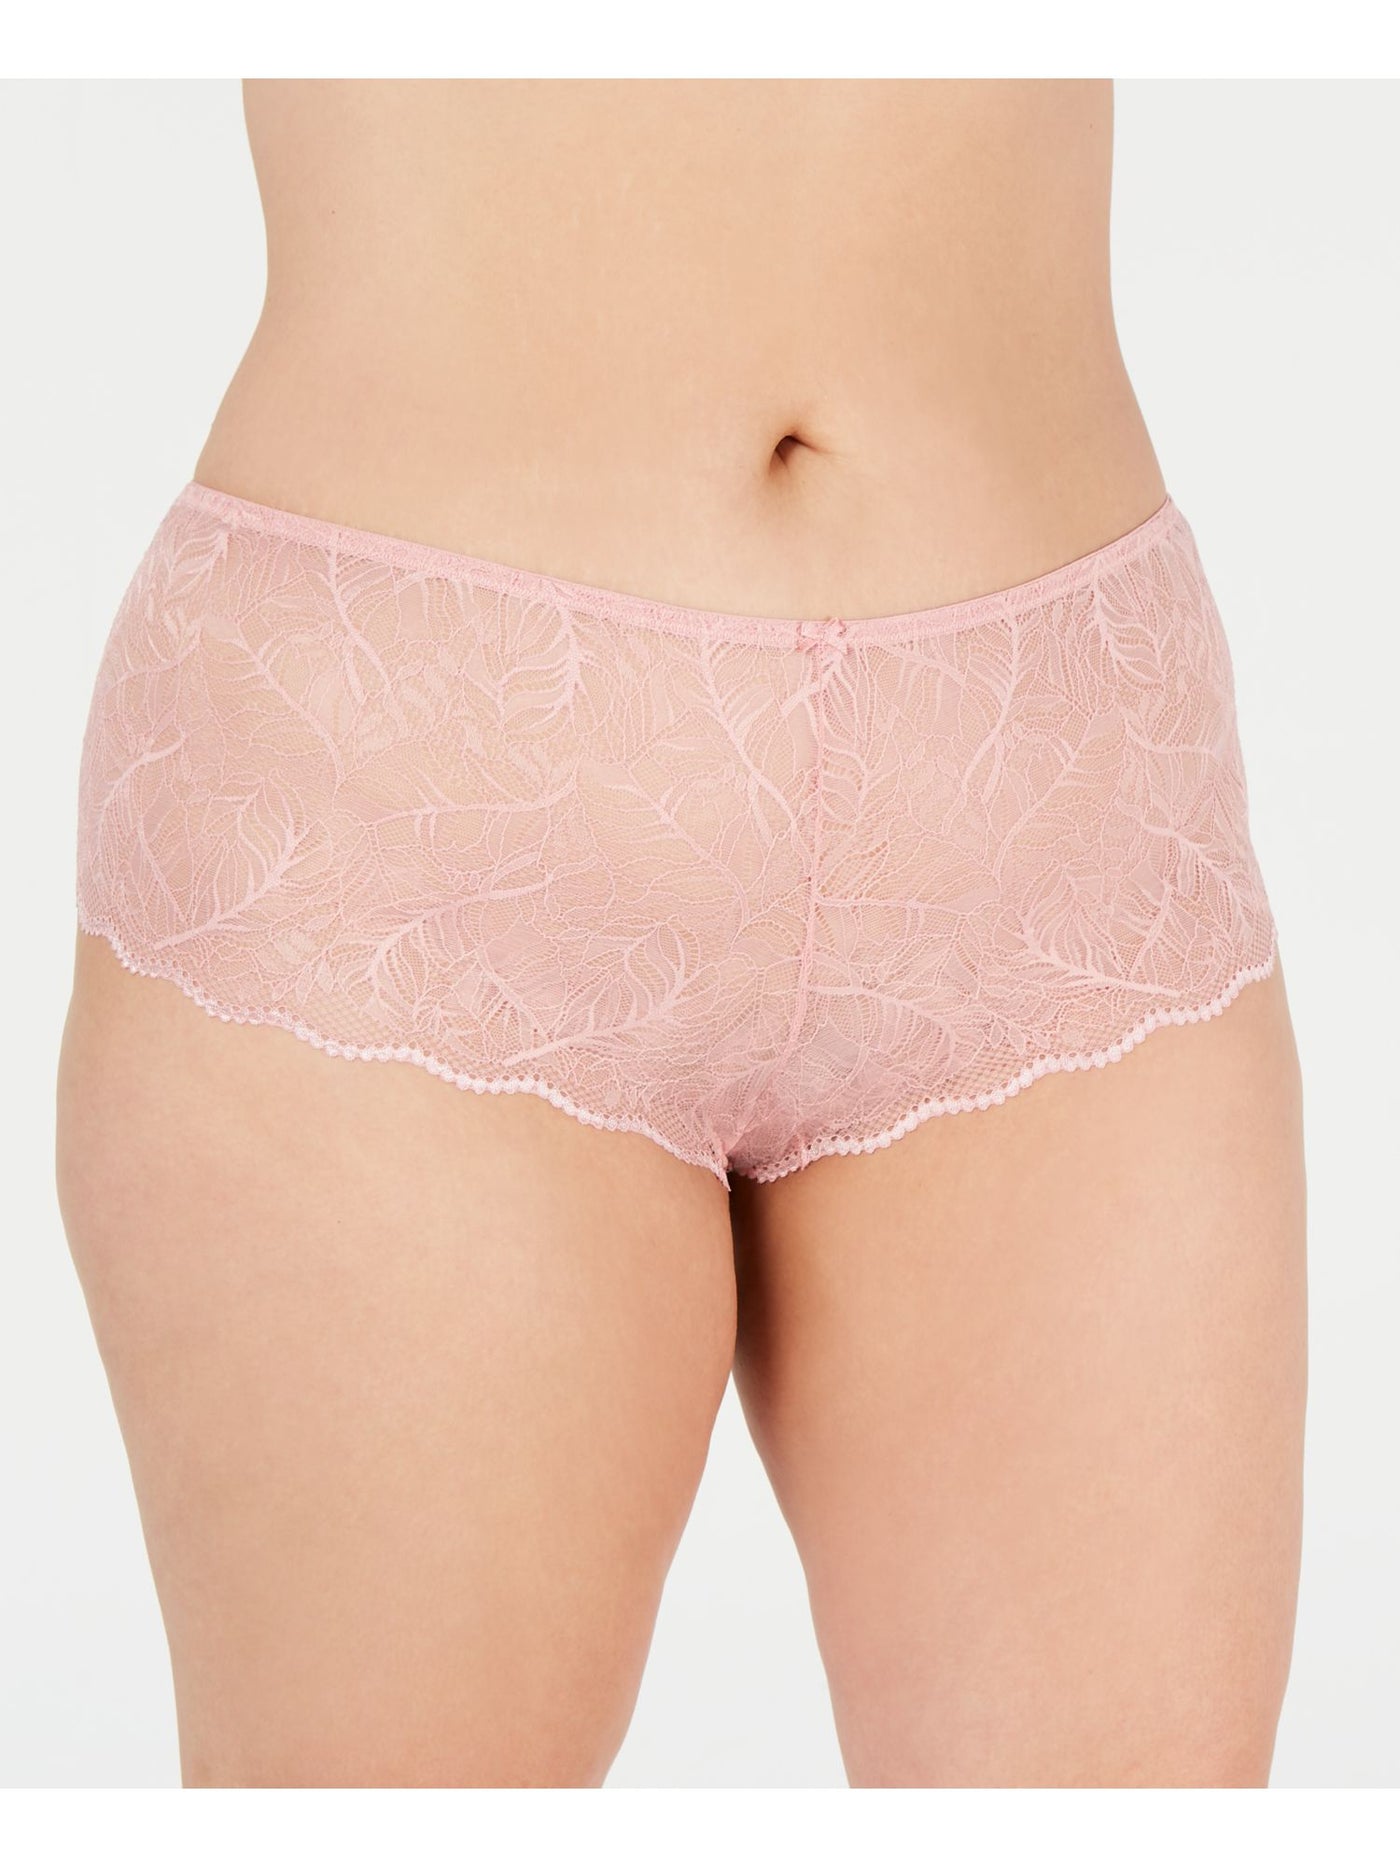 INC Intimates Pink Lace Solid Everyday Boy Short Plus Size: 1X